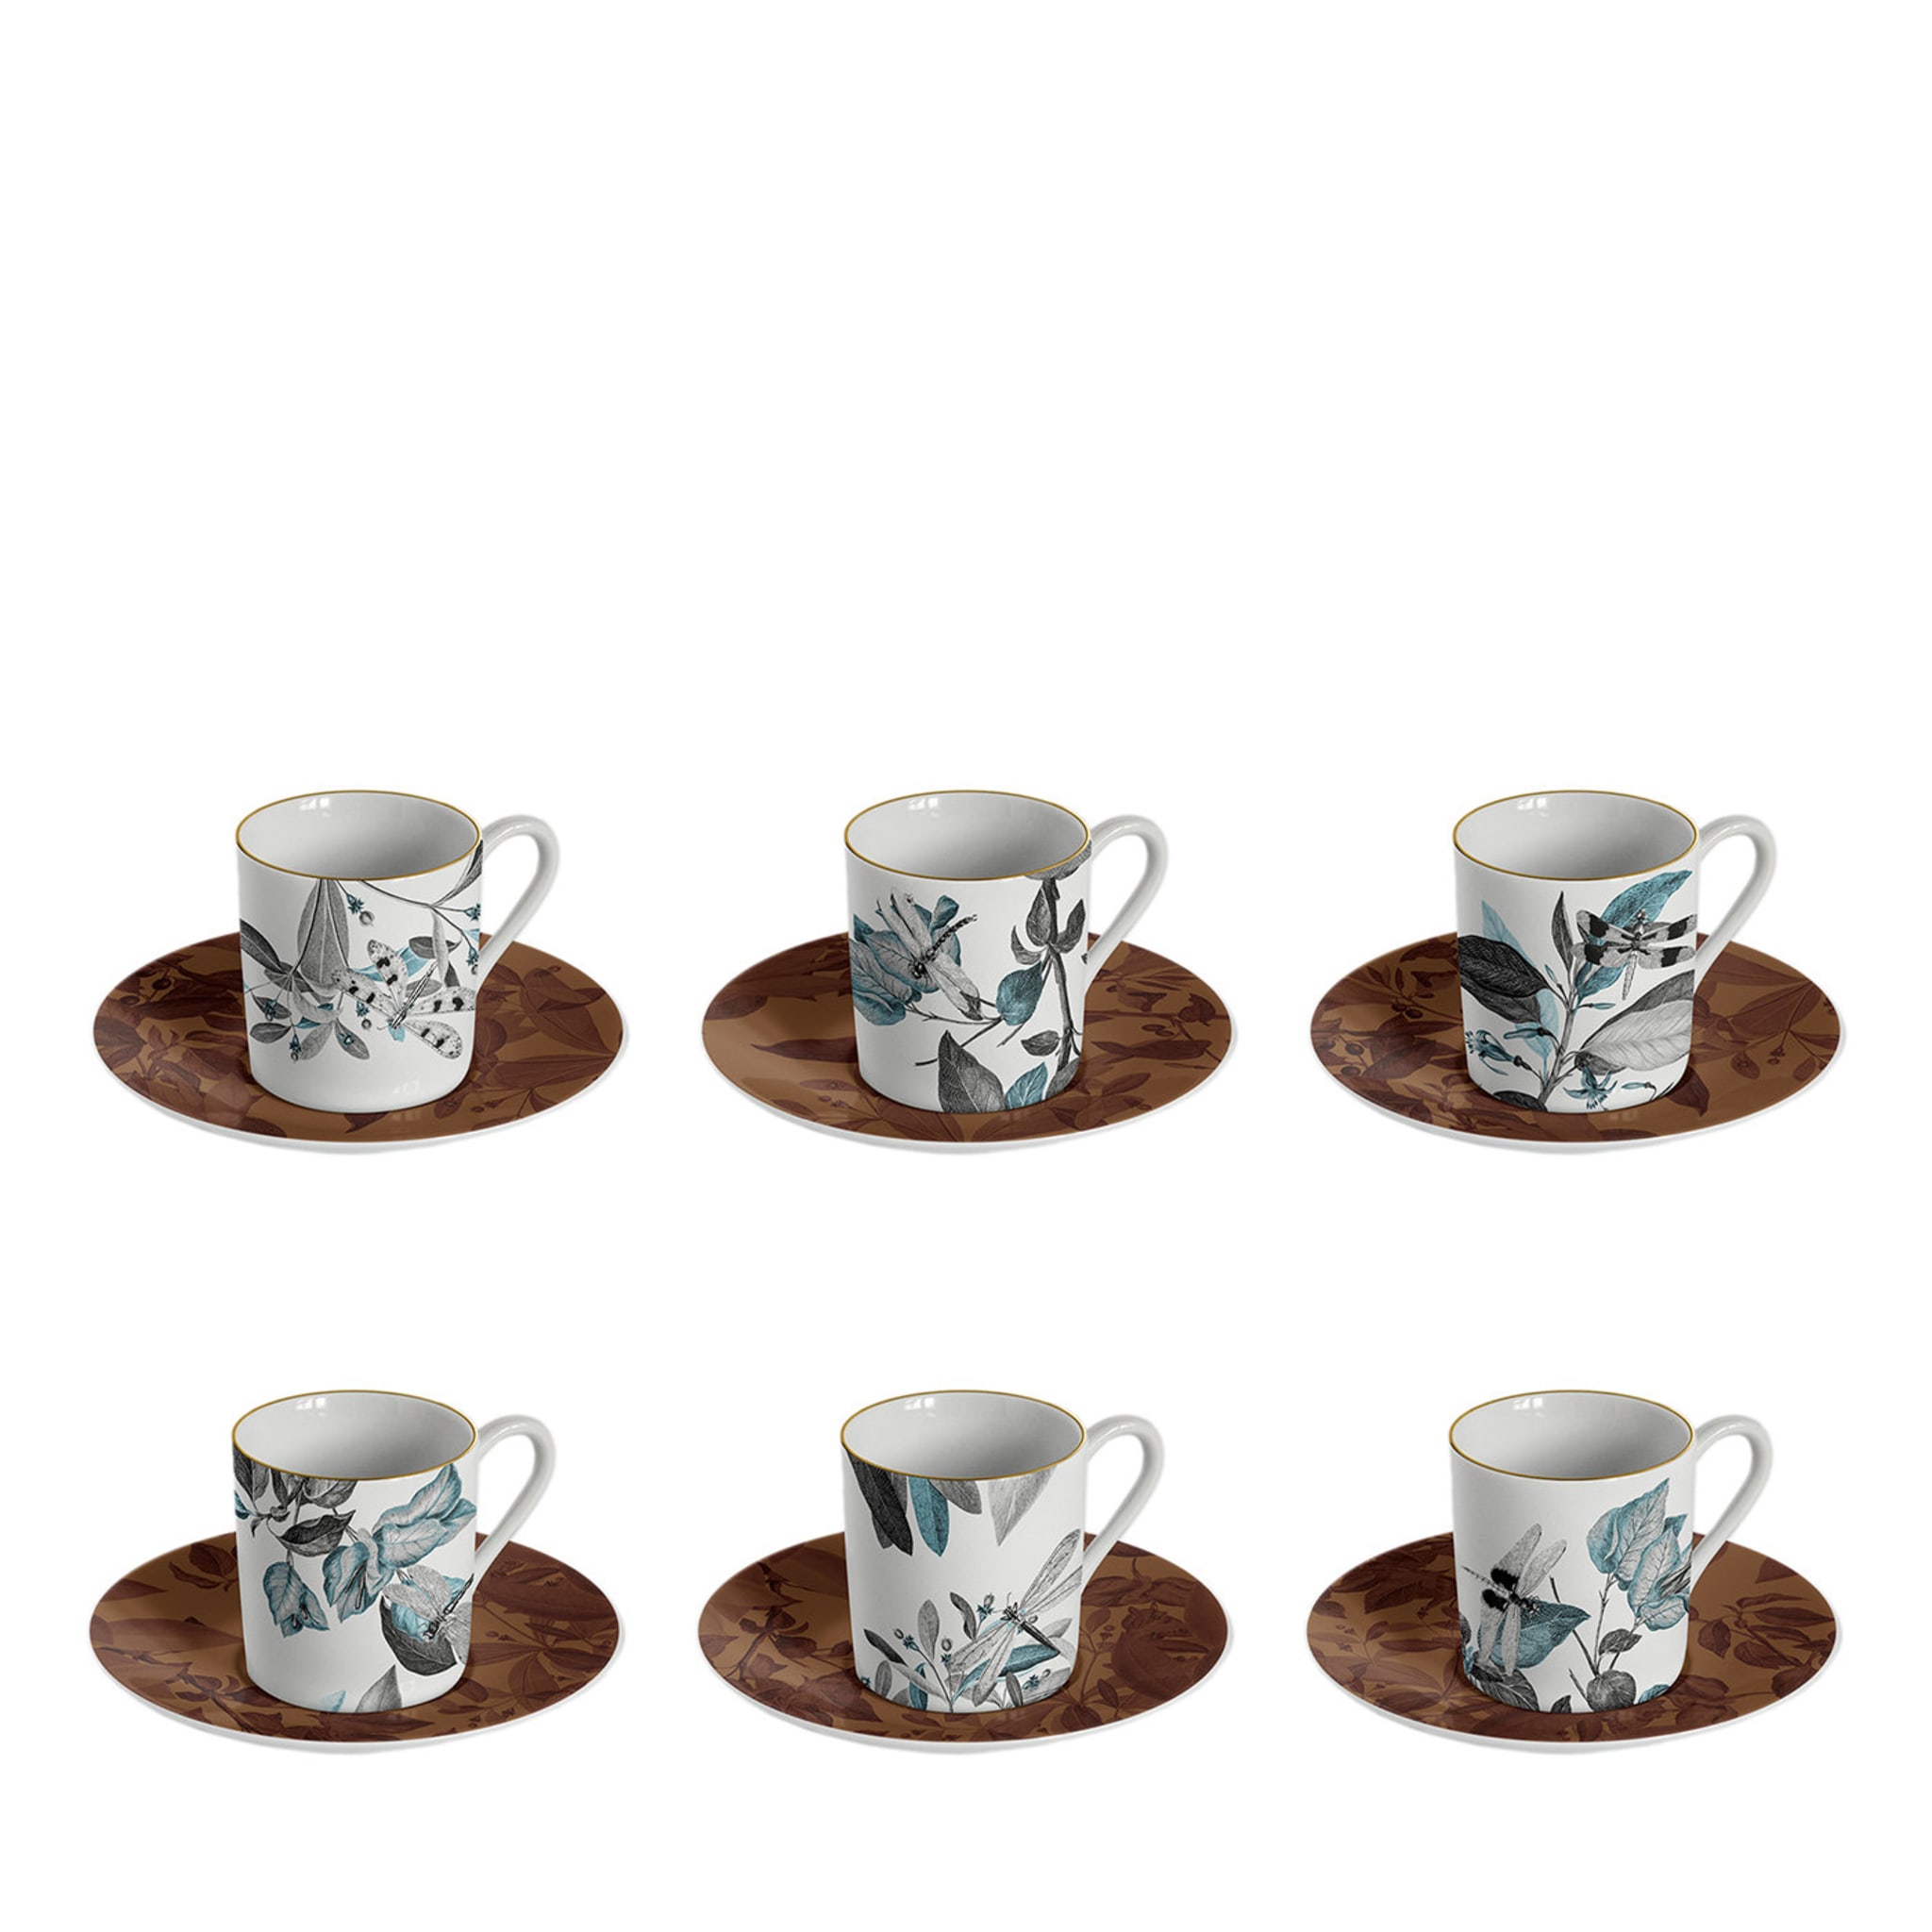 Black Dragon Pool Set of 6 Espresso Cups with Saucers - Main view